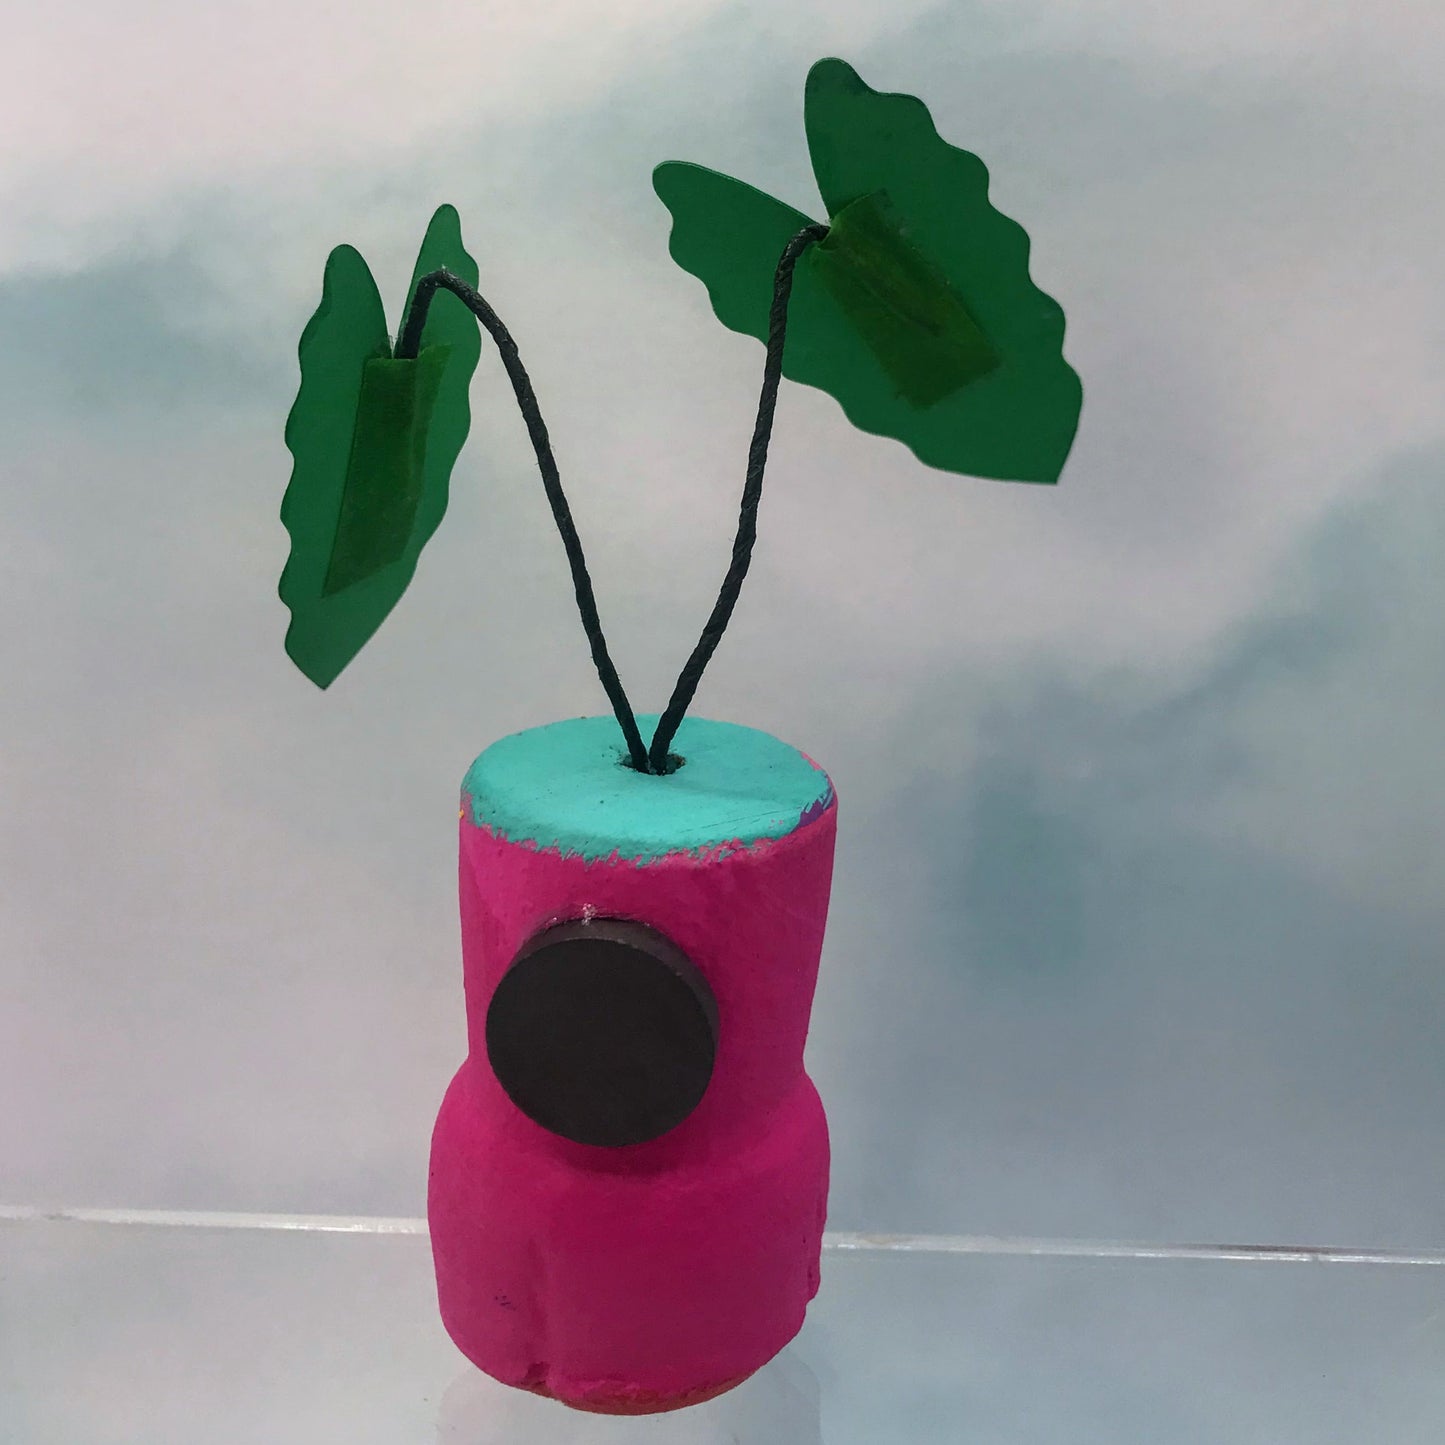 Tiny Magical Paper House Plant in Upcycled Painted Cork - DECORATIVE MAGNET